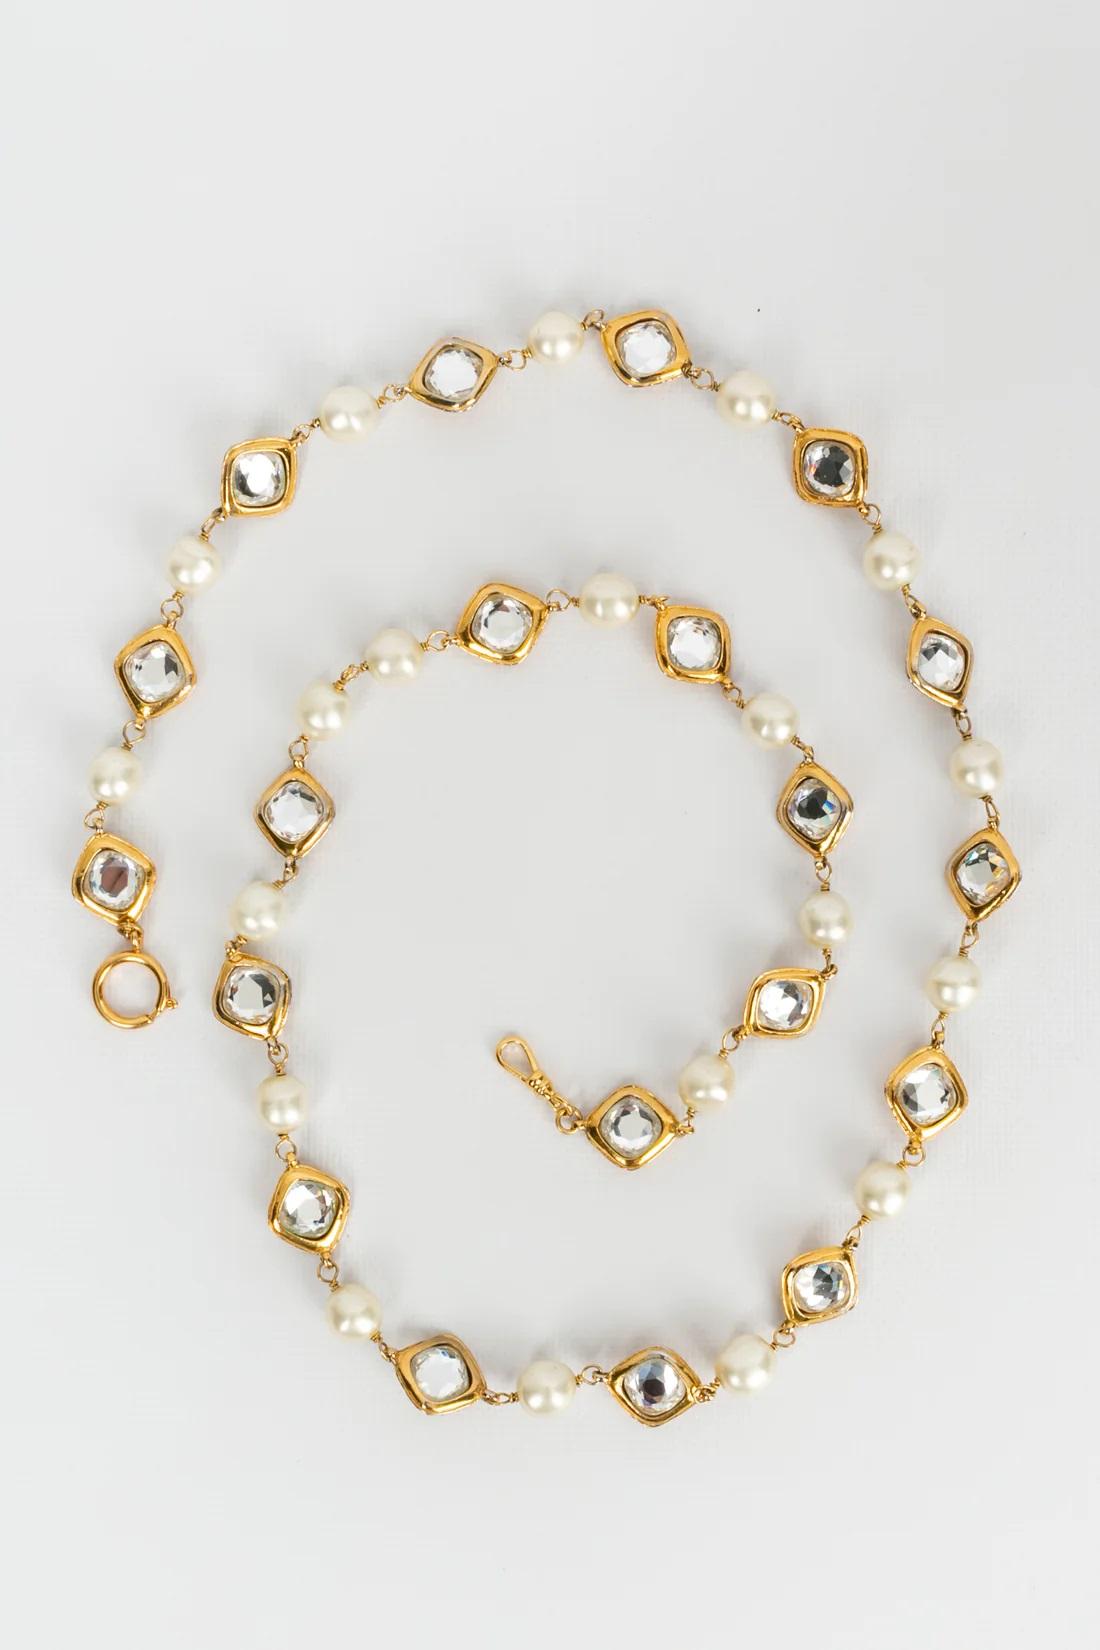 Chanel (Made in France) Set comprised of a pair of clip-on earrings and a necklace in gilded metal with pearly beads and rhinestones.

Additional information:
Dimensions: Necklace: 102 L x 2 W cm (40.15